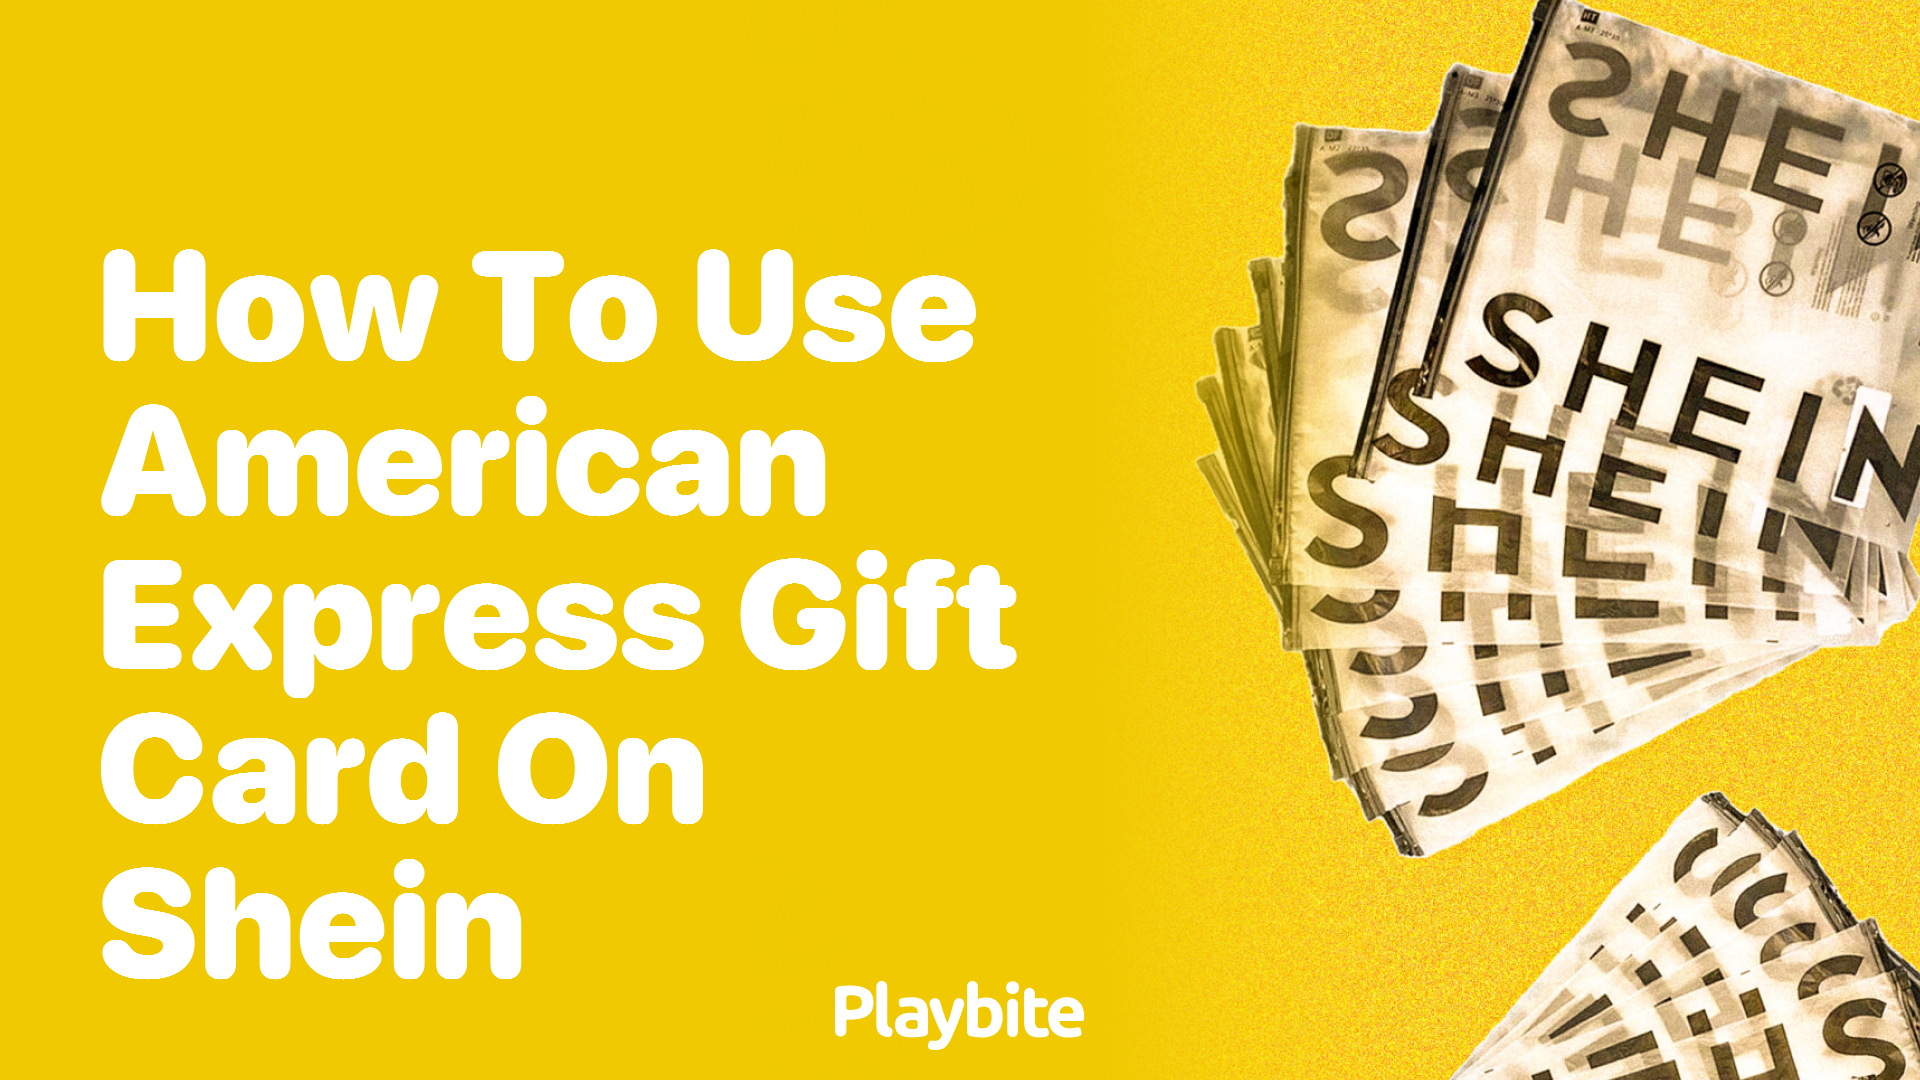 How to Use an American Express Gift Card on SHEIN - Playbite